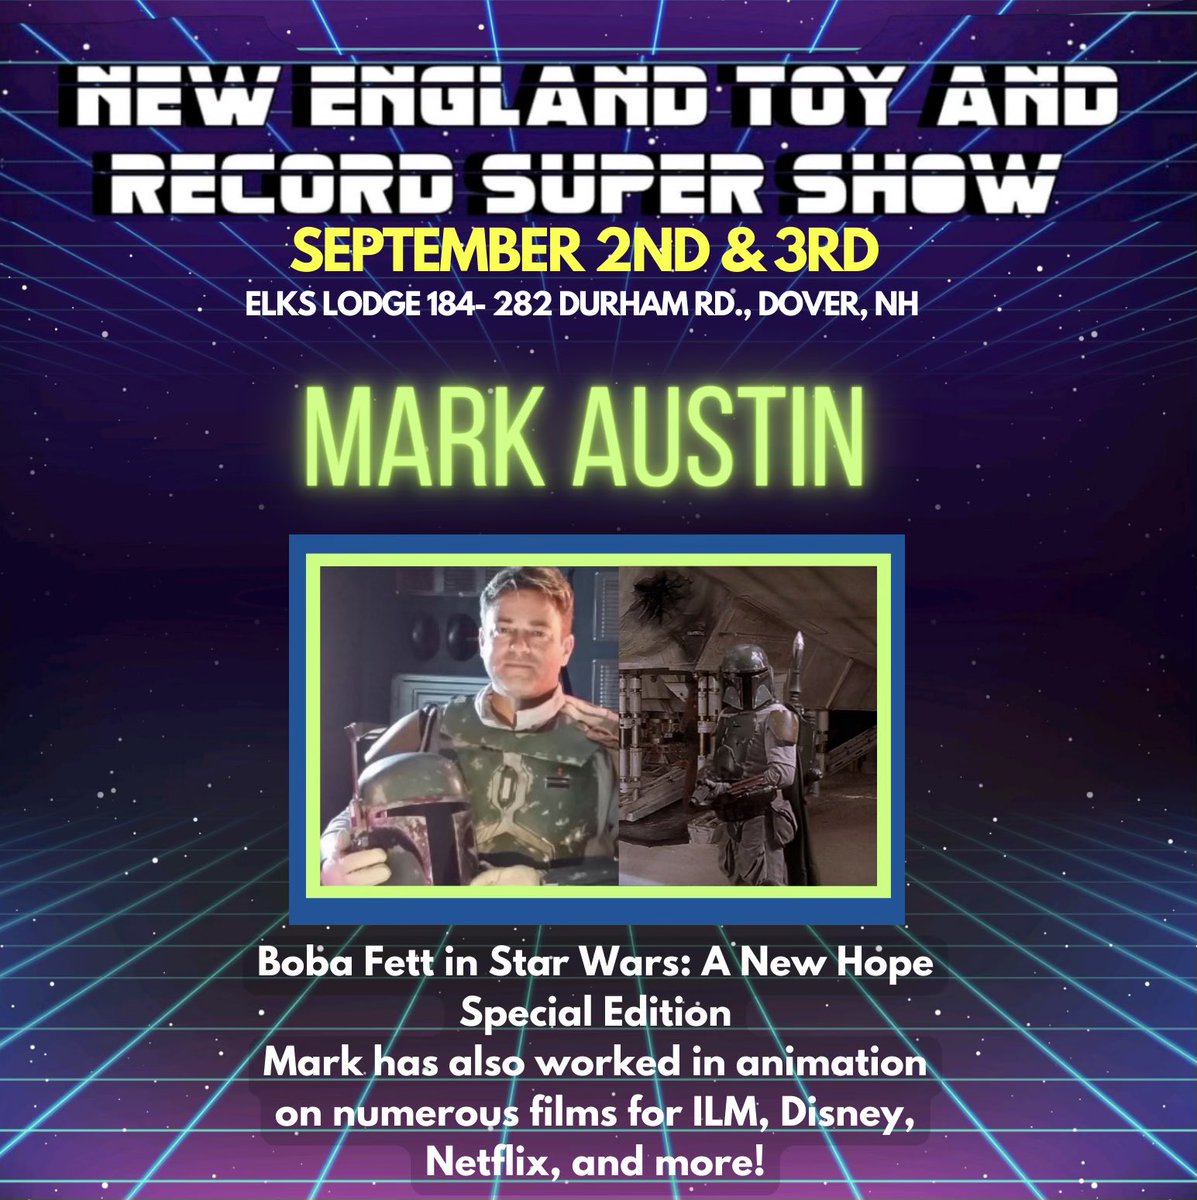 My next convention appearance is coming up fast. New England!!!!! Labor Day weekend. Hope to see some of you east coast folks there if you can make it….!!!! ❤️❤️❤️ Mark Anthony Austin Boba Fett from A New Hope. 🤘🤘🤘